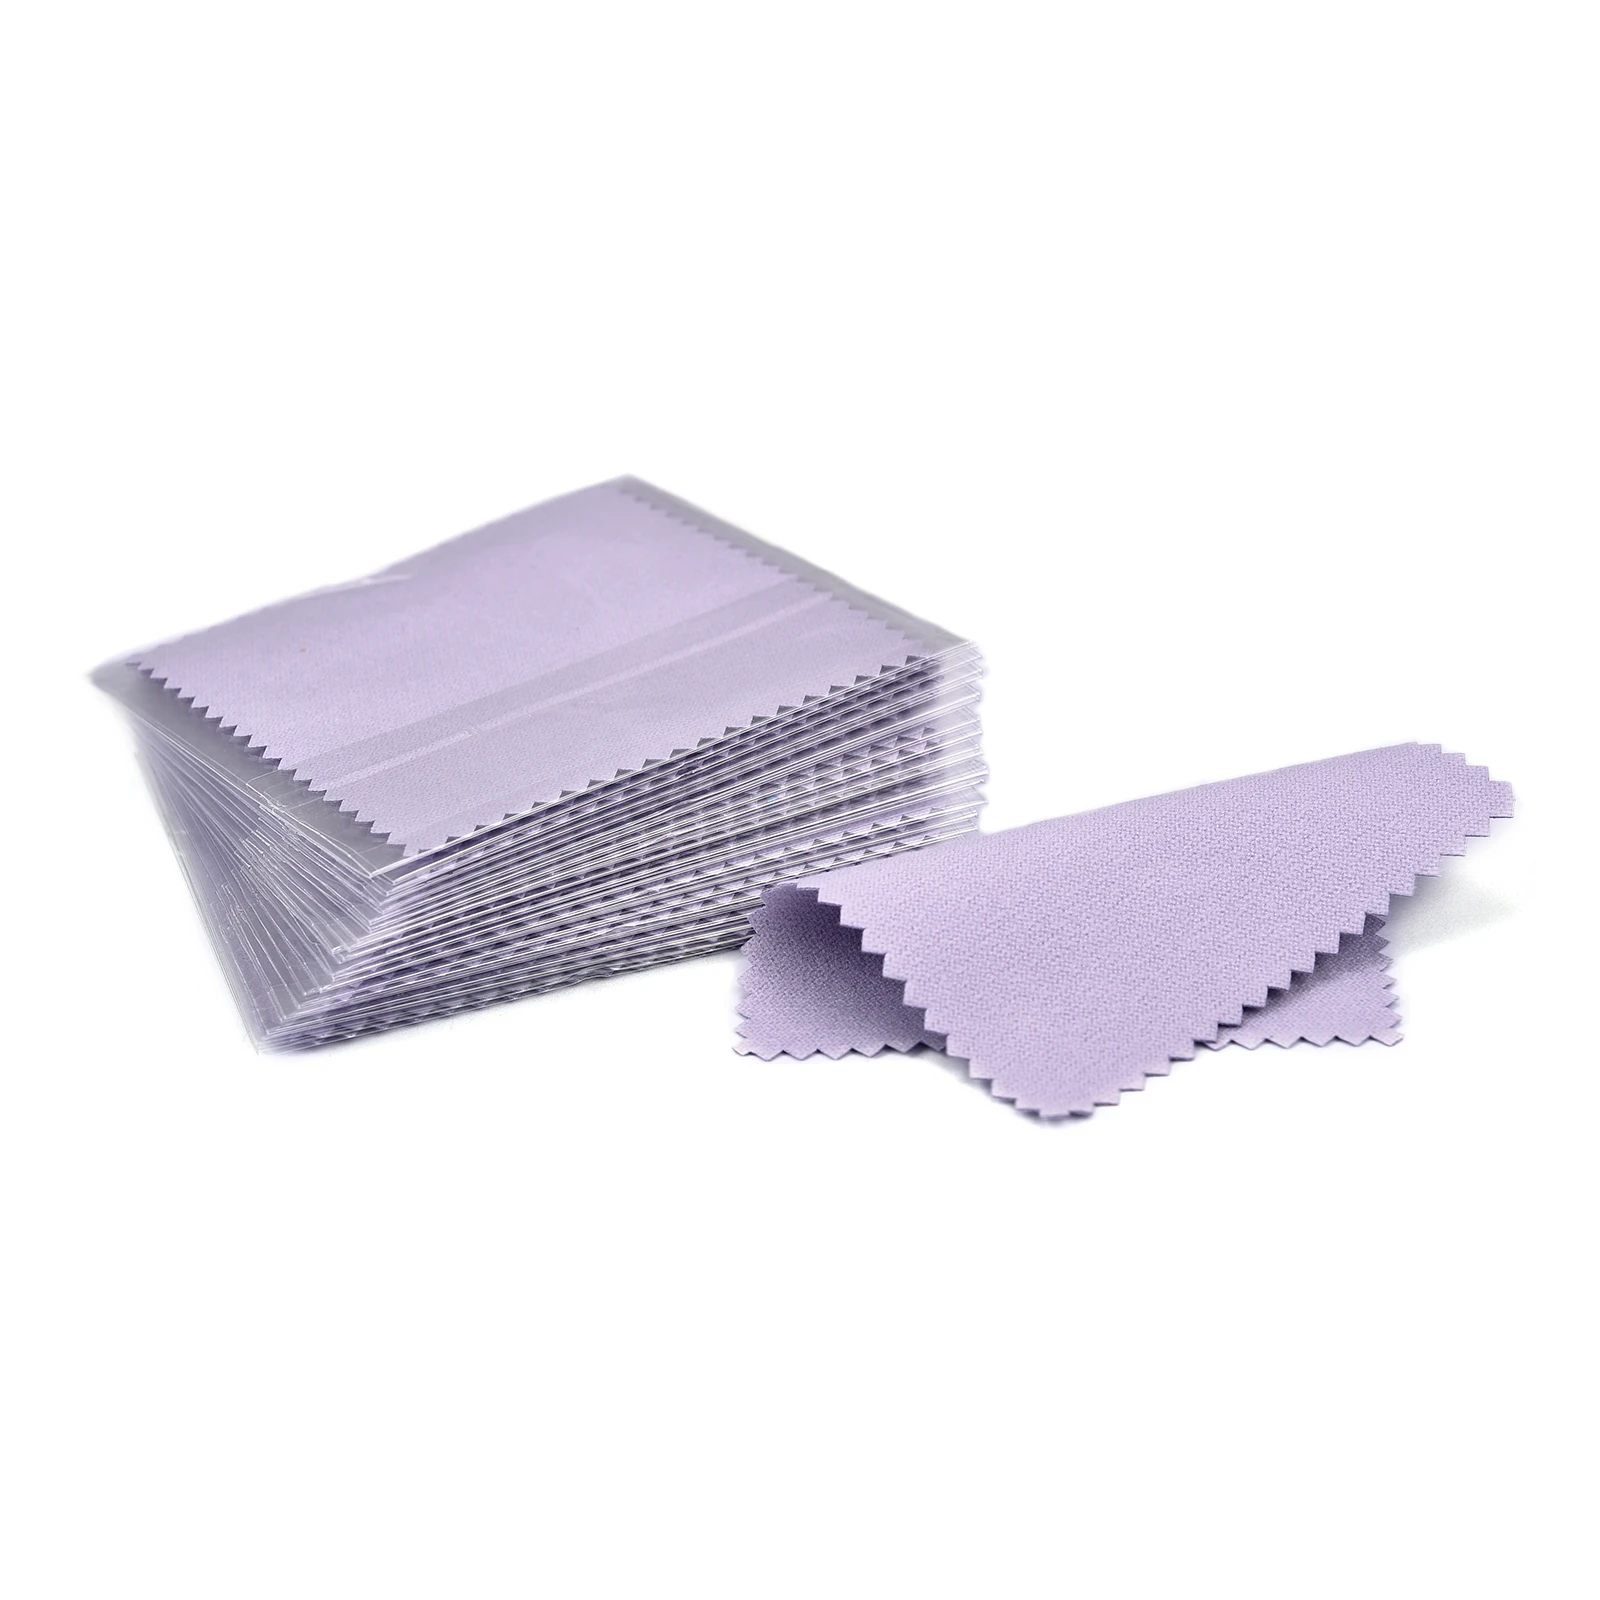 50pcs/Pack 8x8cm Sterling Silver Cleaning Cloth Color Polishing Cloth Silver Gpld Jewelry Soft Wipe Individually Packaged